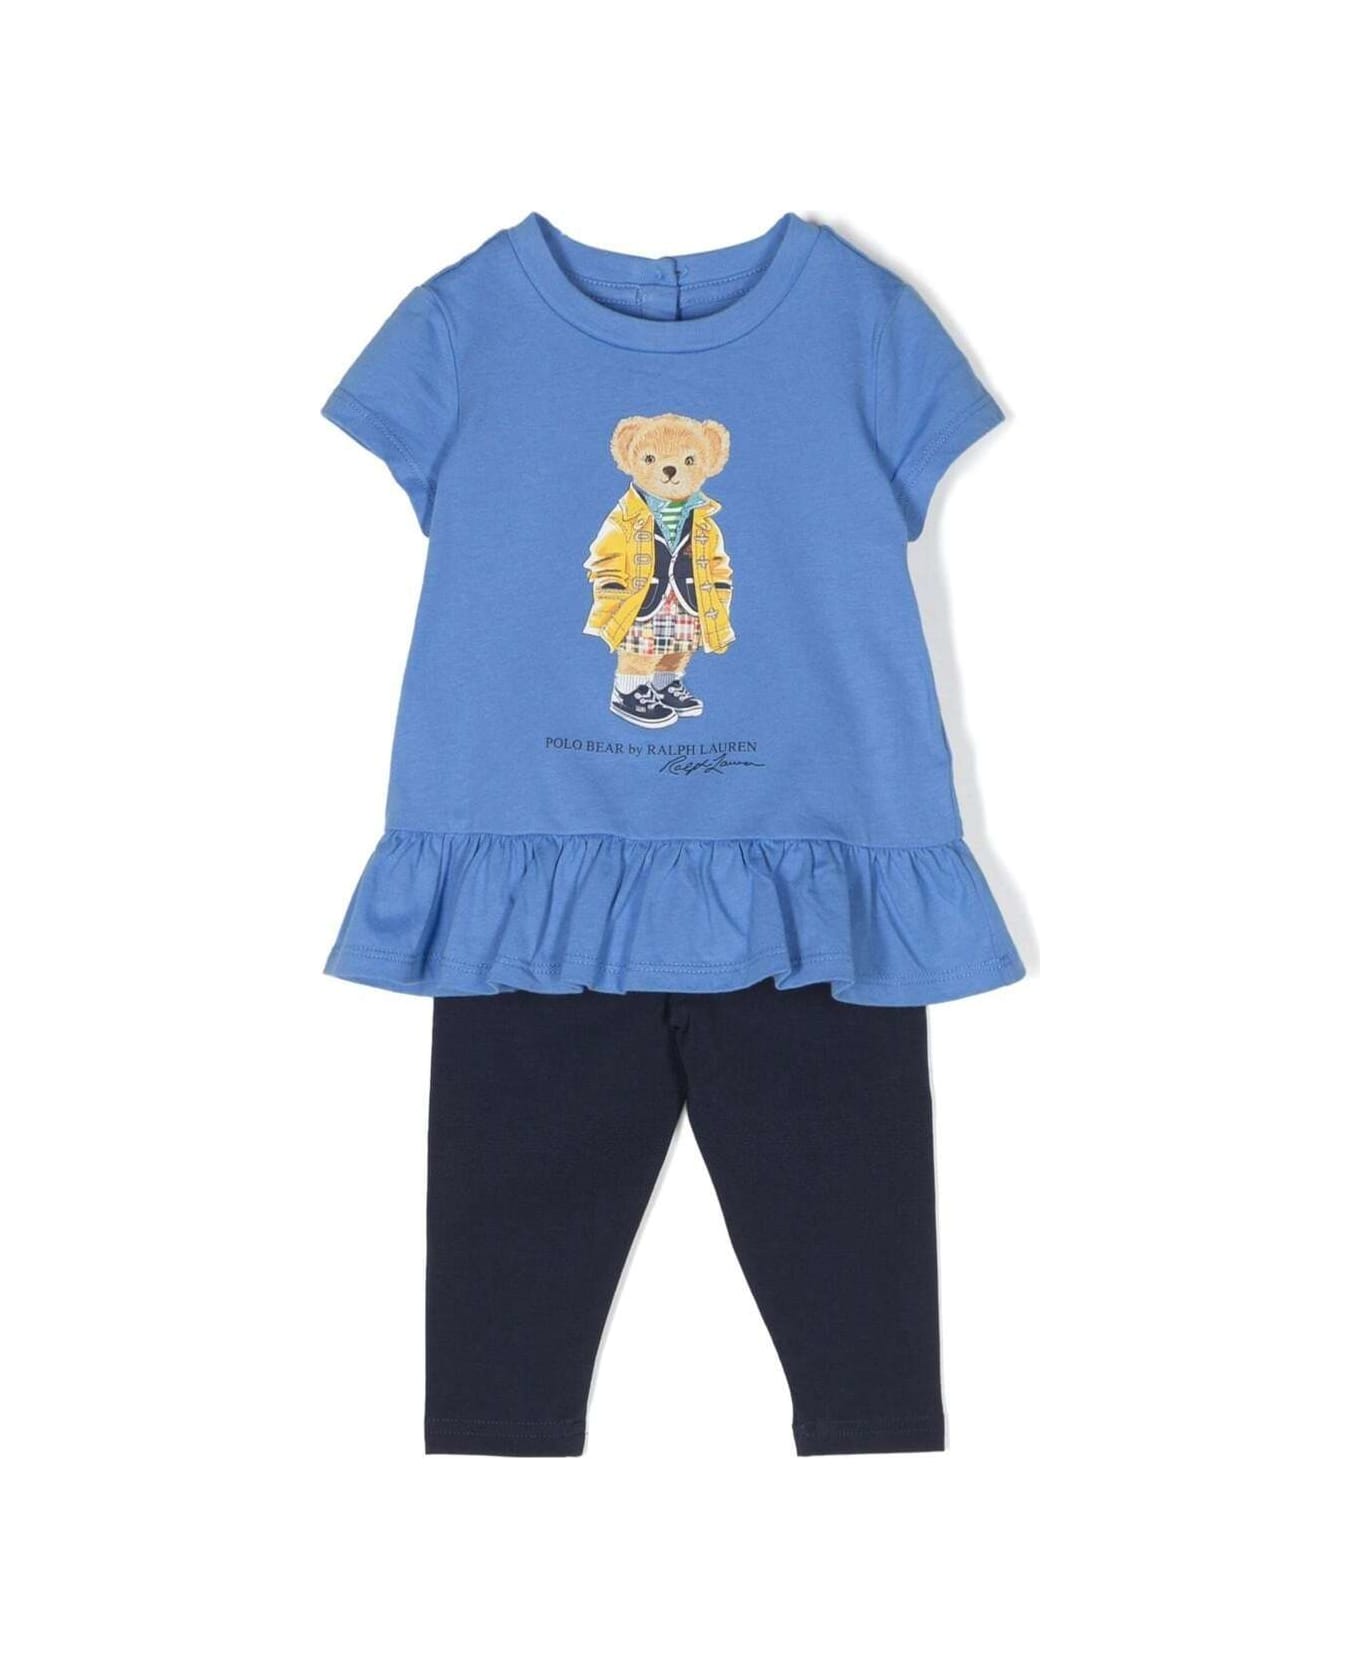 Polo Ralph Lauren Blue And Black Set With Top And Leggings With Teddy Bear Print In Cotton Baby - Blu ボトムス